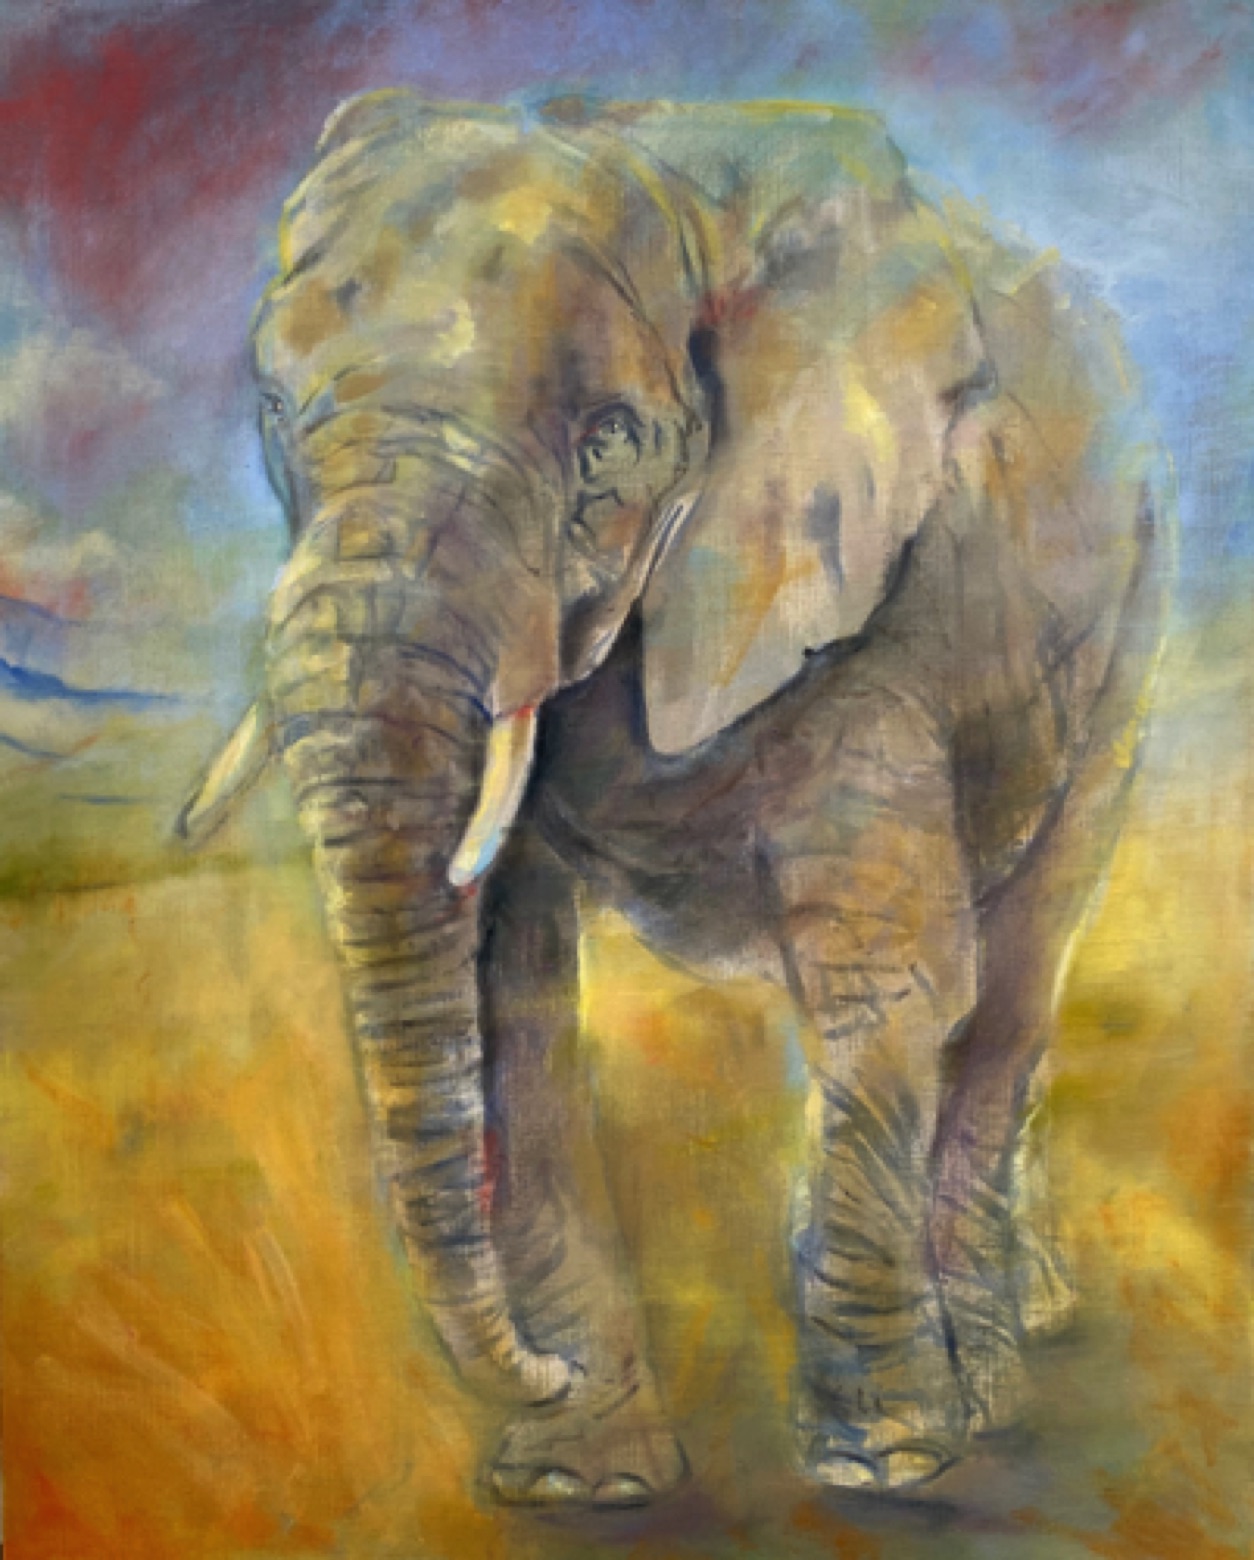 Gregg Chadwick
Elephant Song
30”x24” oil on linen 2023
Available at Los Angeles Zoo's Beastly Ball May 2023